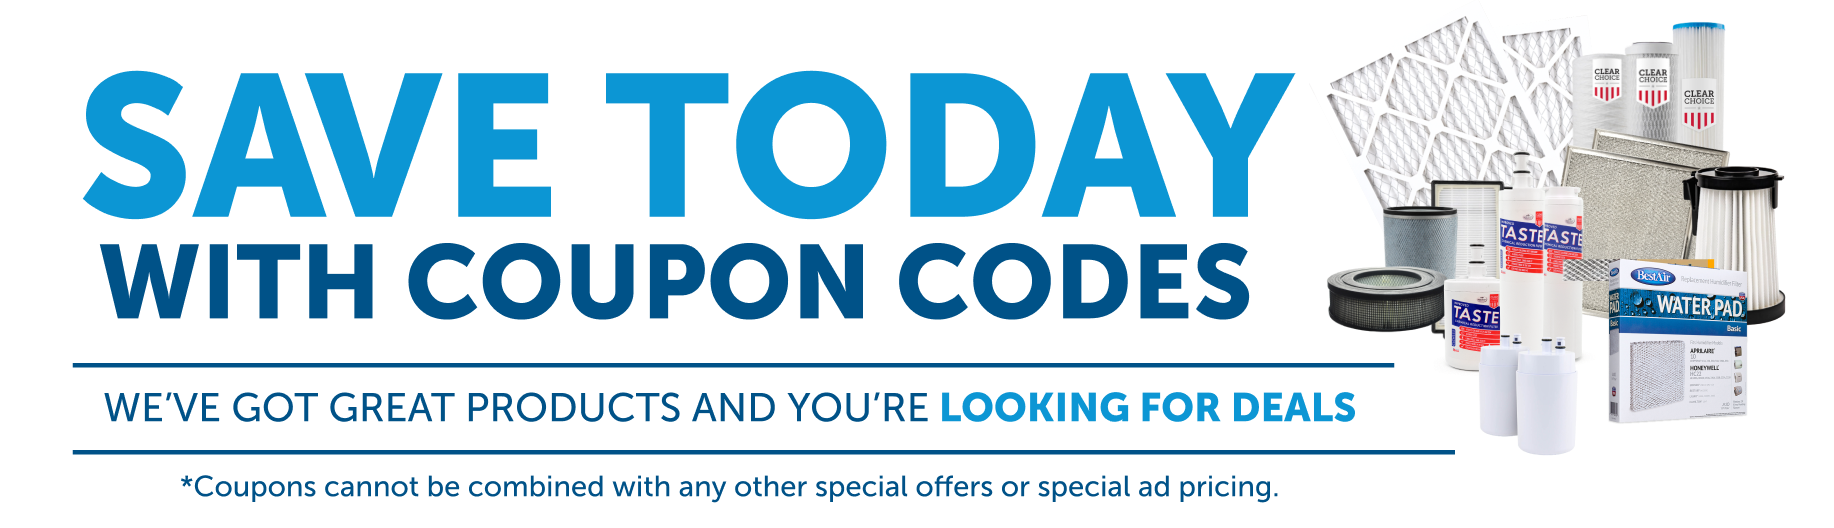 Save today with coupon codes